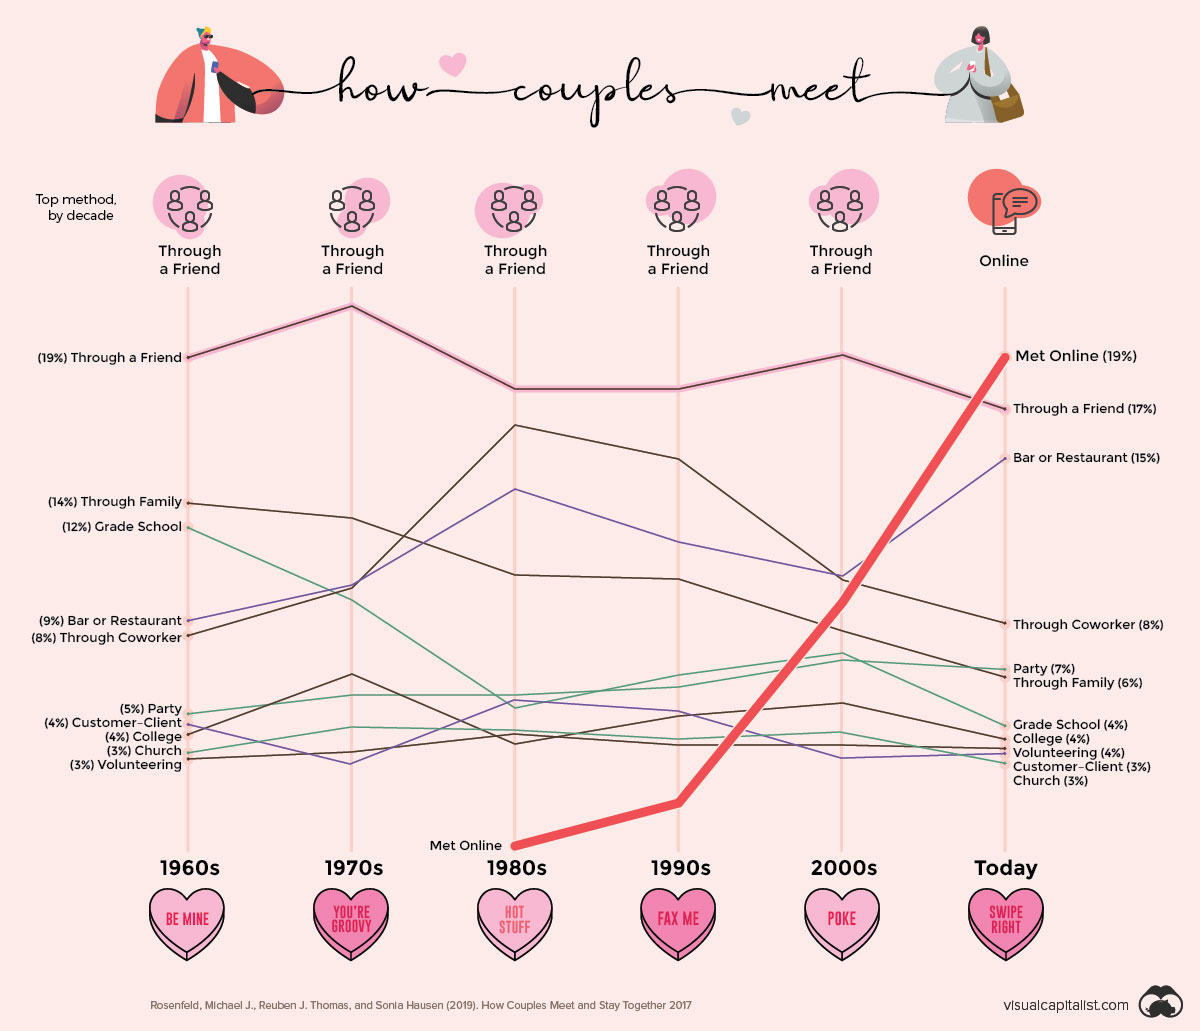 The Rise Of Online Dating And The Company That Dominates The Market